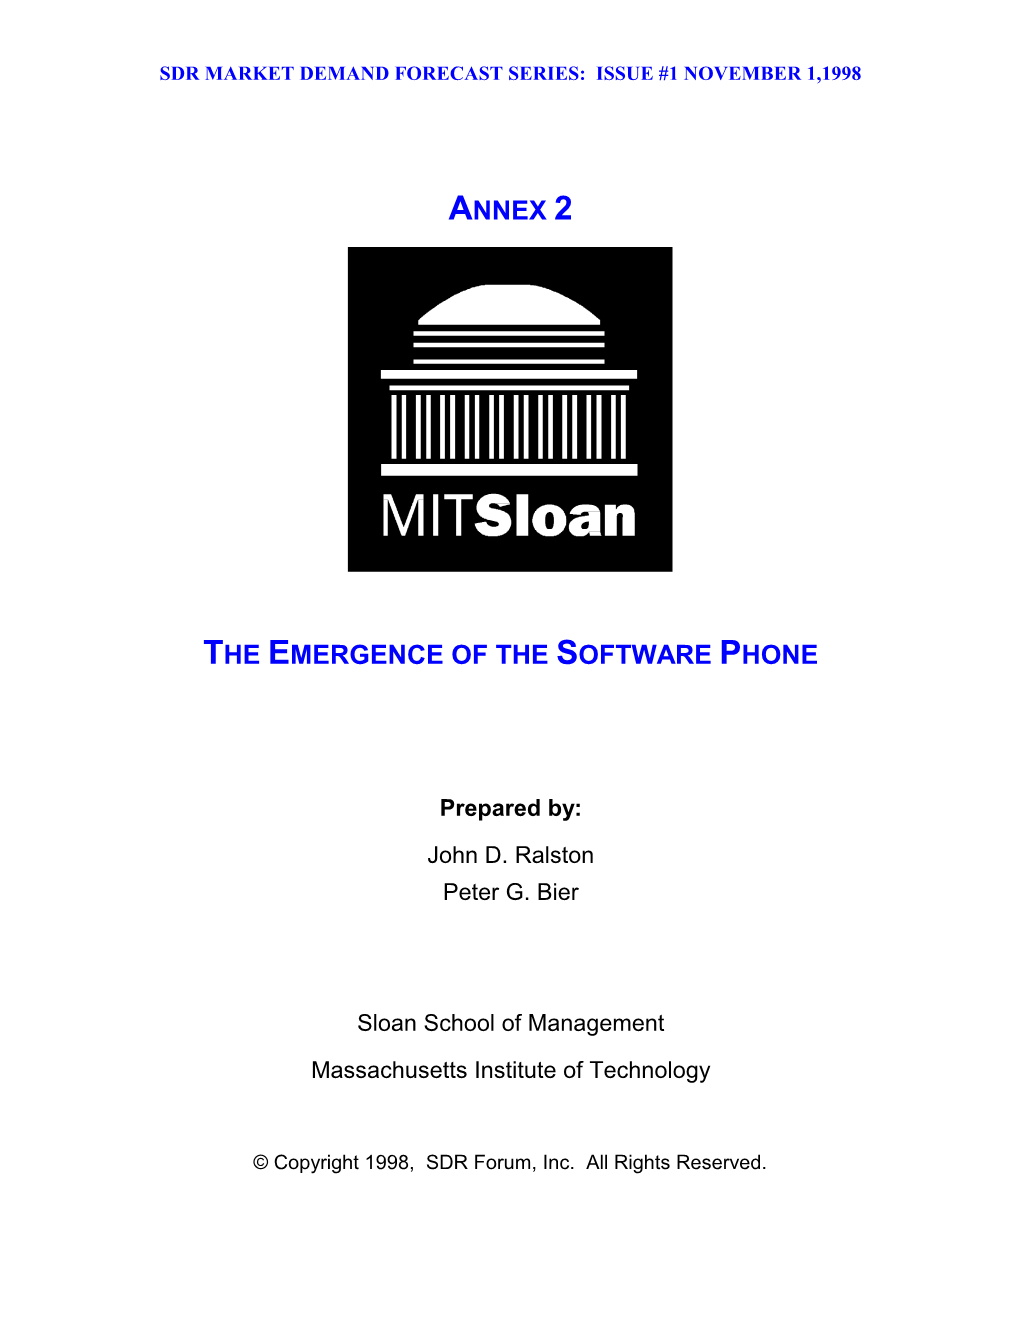 The Emergence of the Software Phone